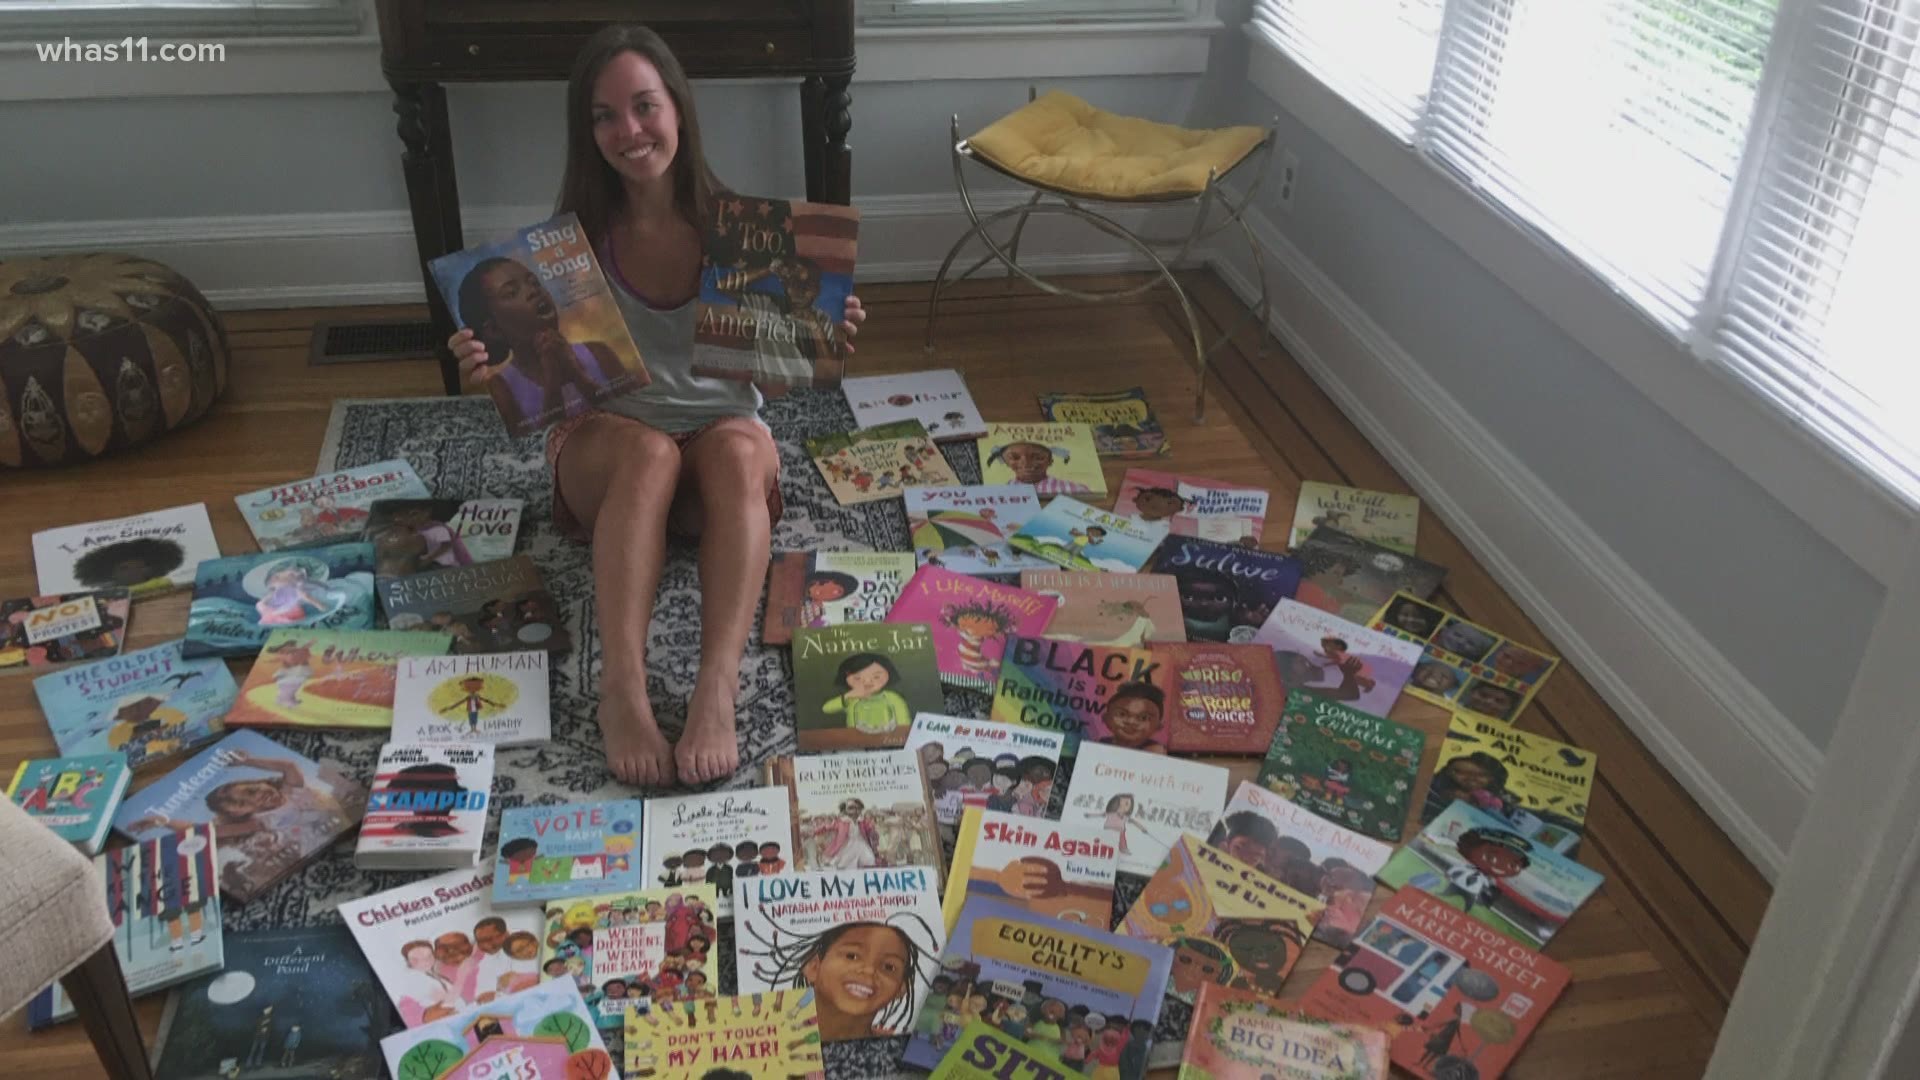 Renee DuFour hopes to inspire kids at Northaven Elementary School in Jeffersonville with books about diversity, inclusion and activism.